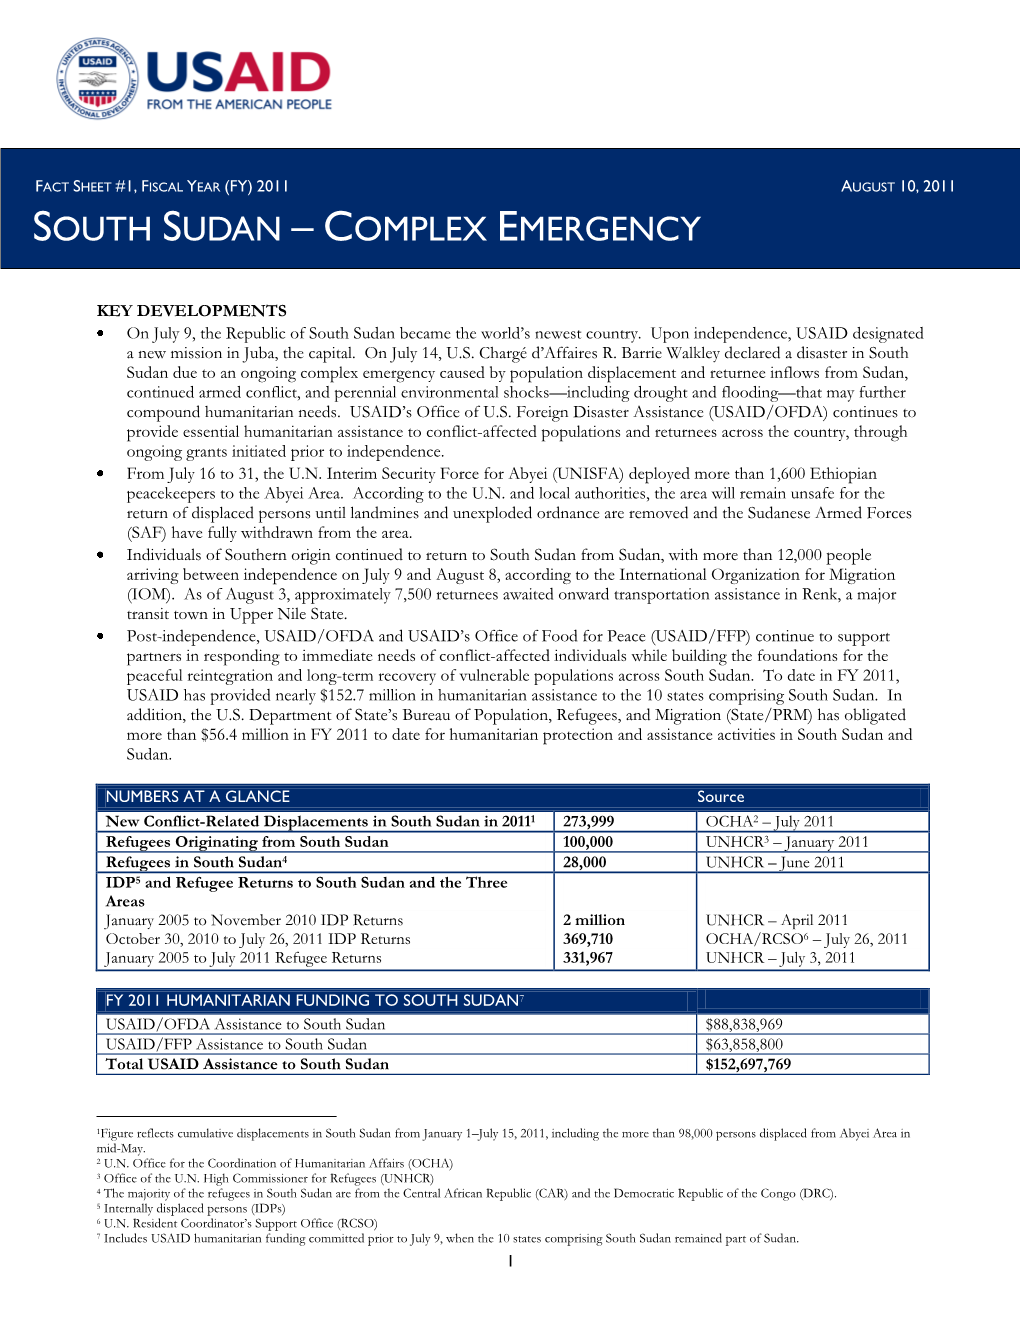 South Sudan Complex Emergency Fact